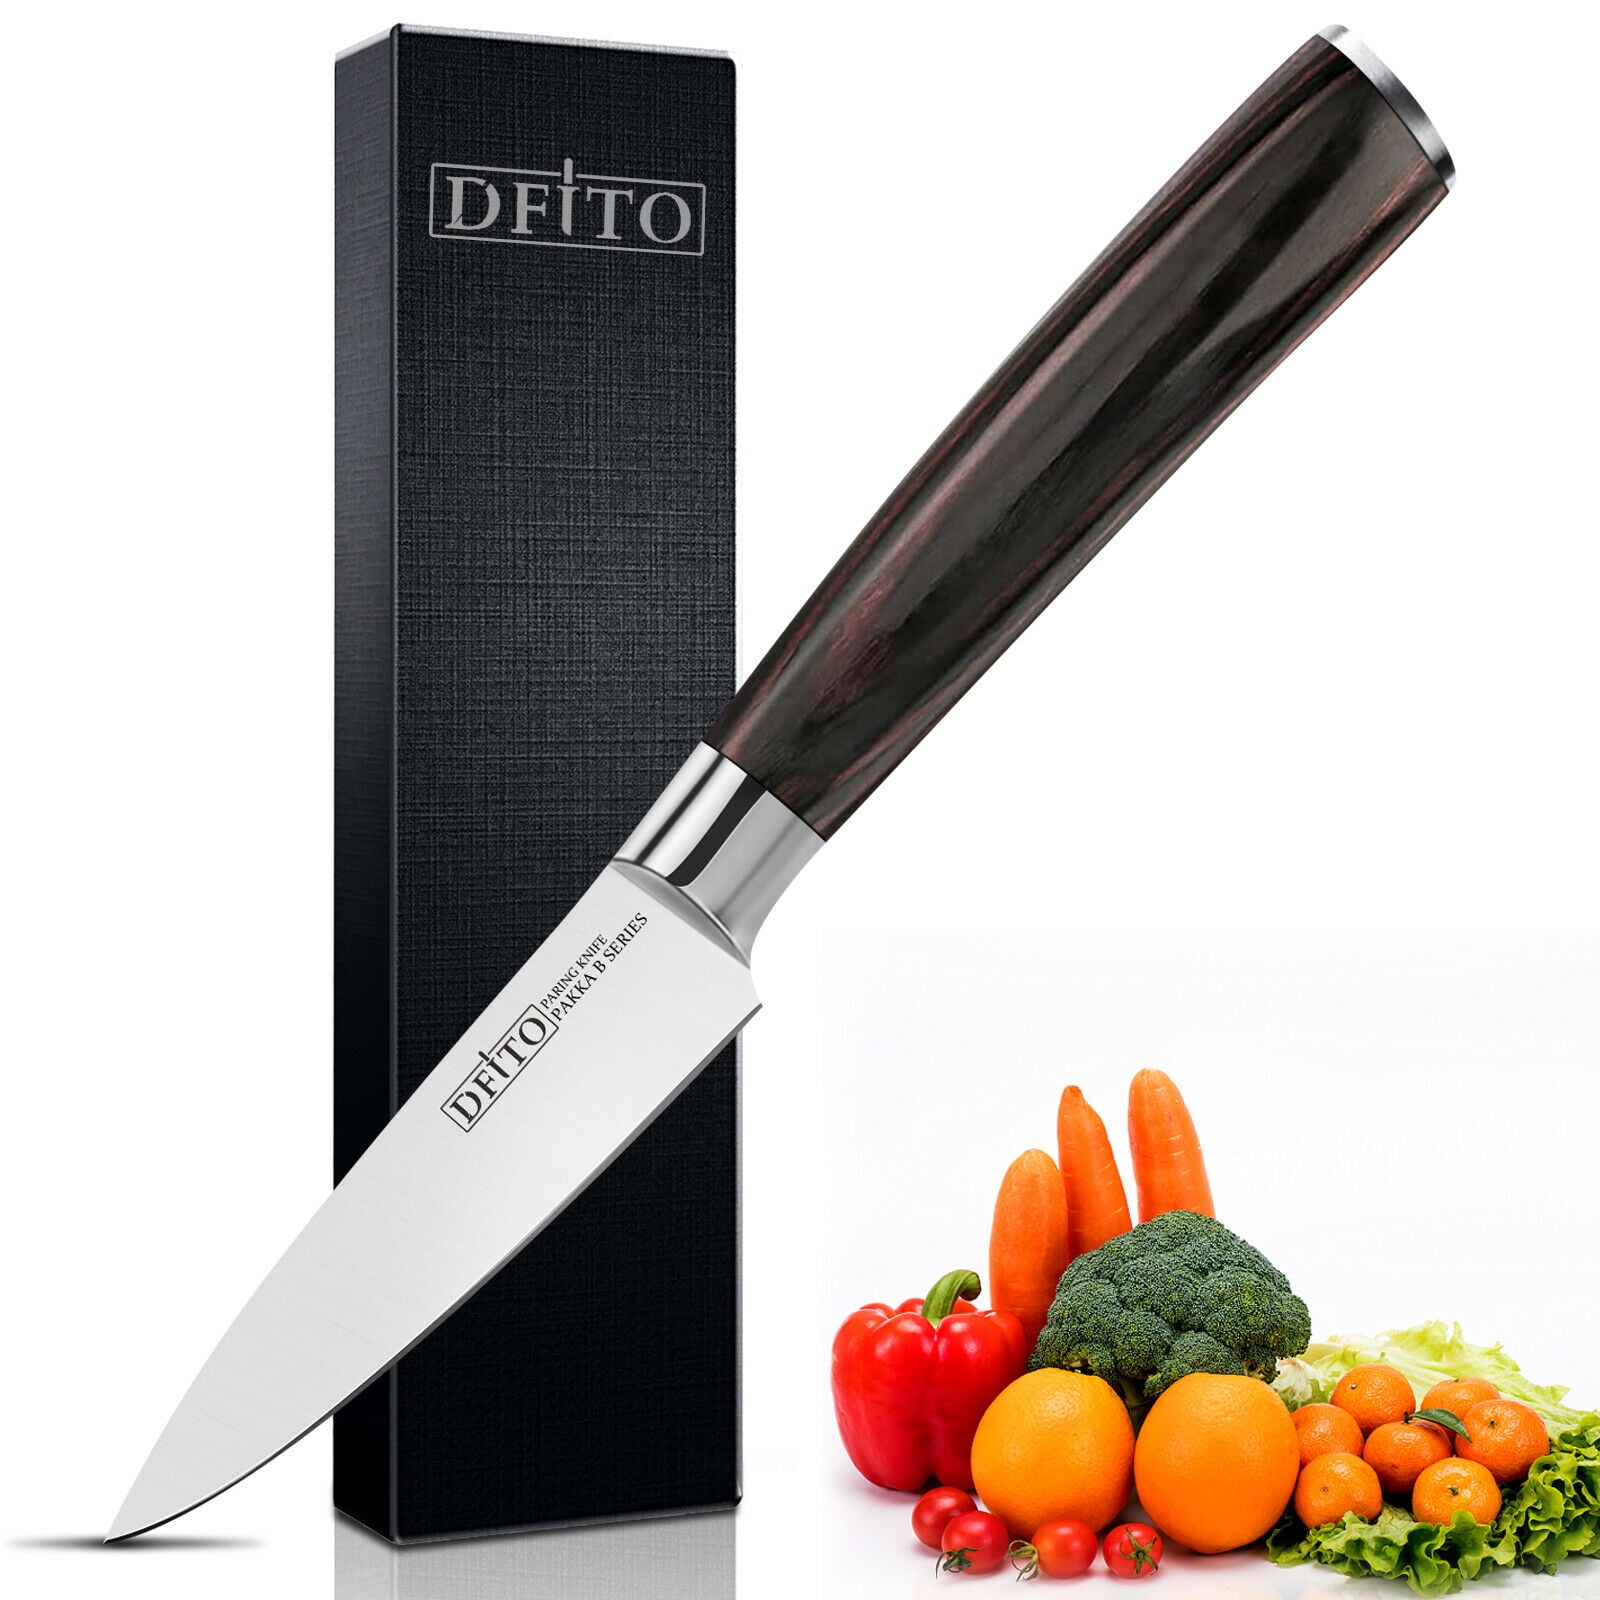 OAKSWARE Paring Knife, 4 inch Small Kitchen Knife Ultra Sharp German  Stainless Steel Fruit and Vegetable Cutting Chopping Knives - Full Tang  Ergonomic